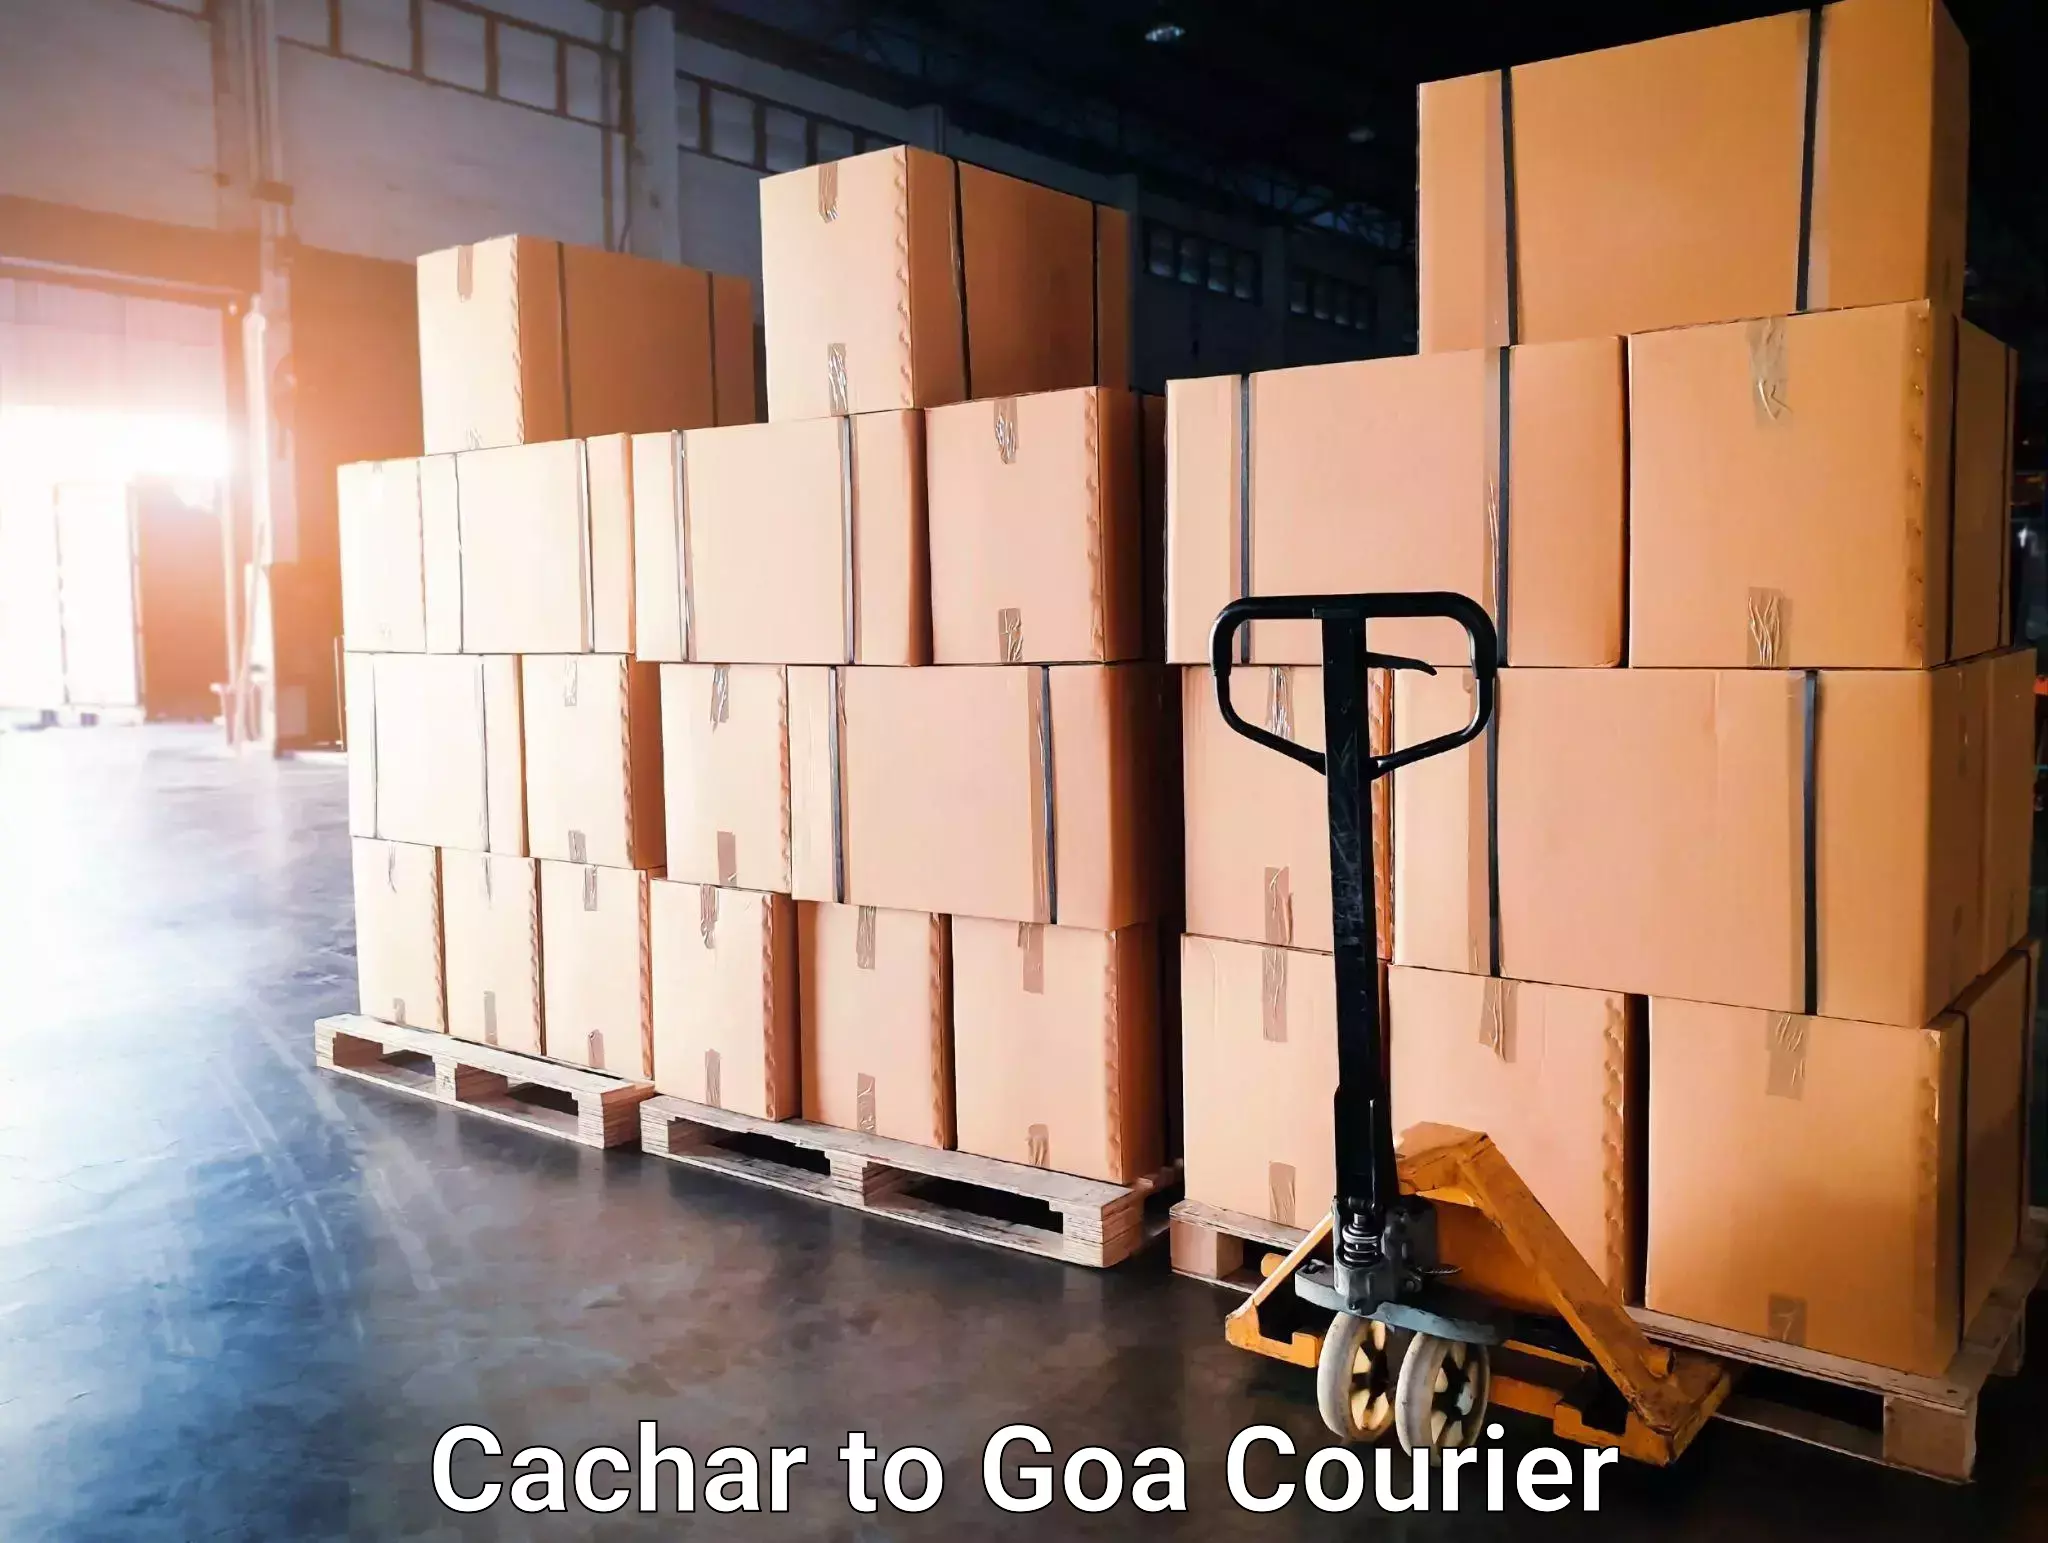 Express delivery capabilities Cachar to South Goa